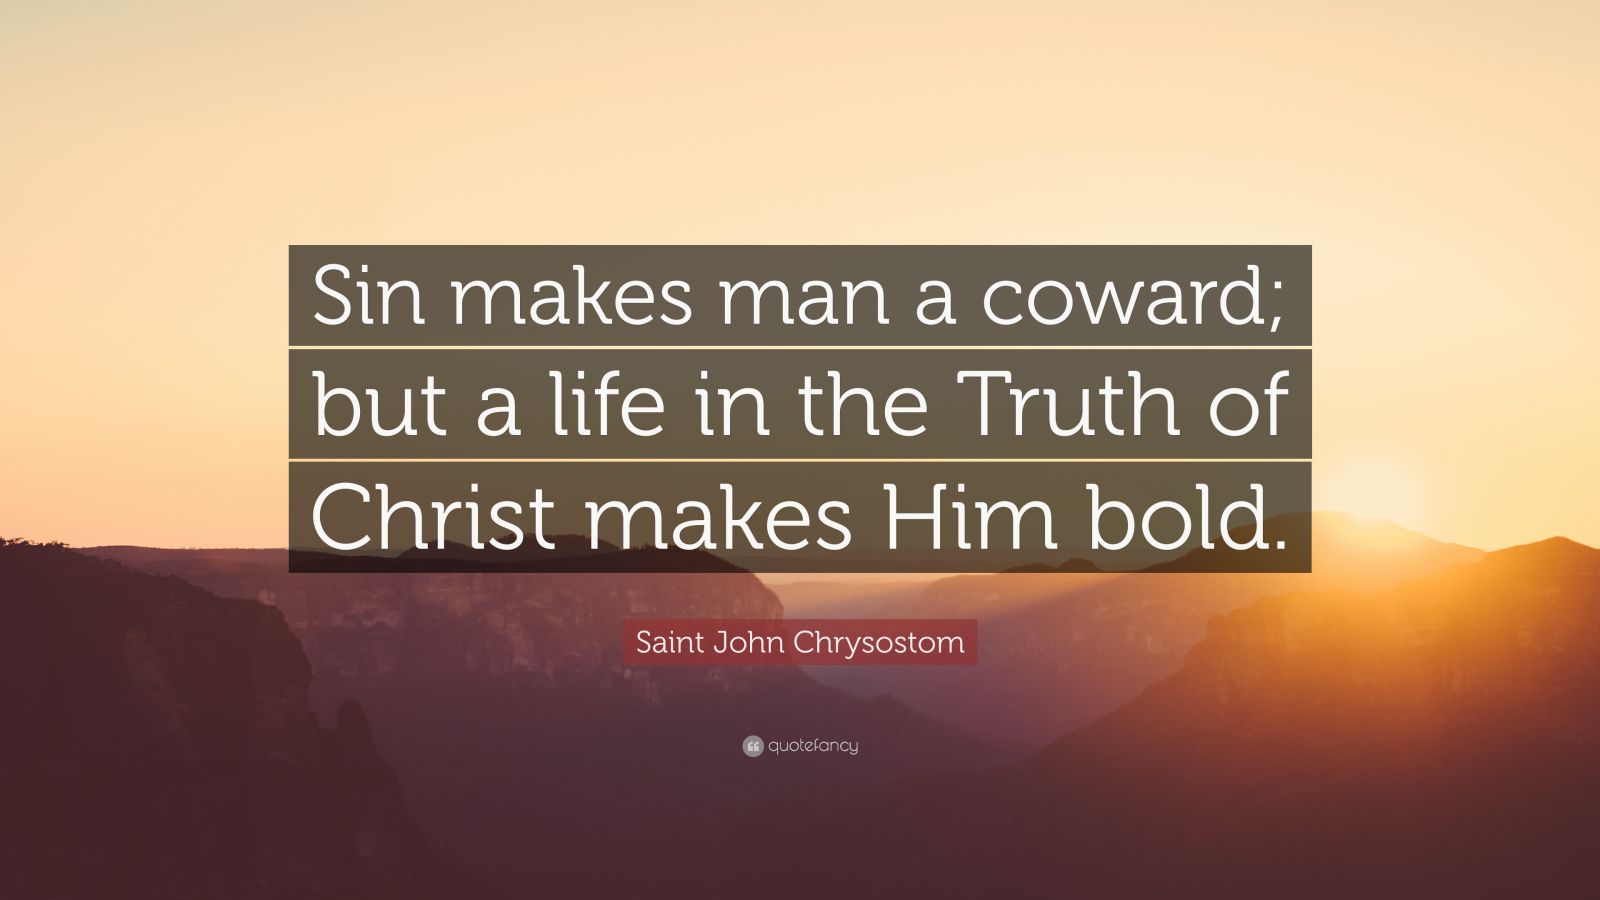 Saint John Chrysostom Quote: “Sin makes man a coward; but a life in the ...